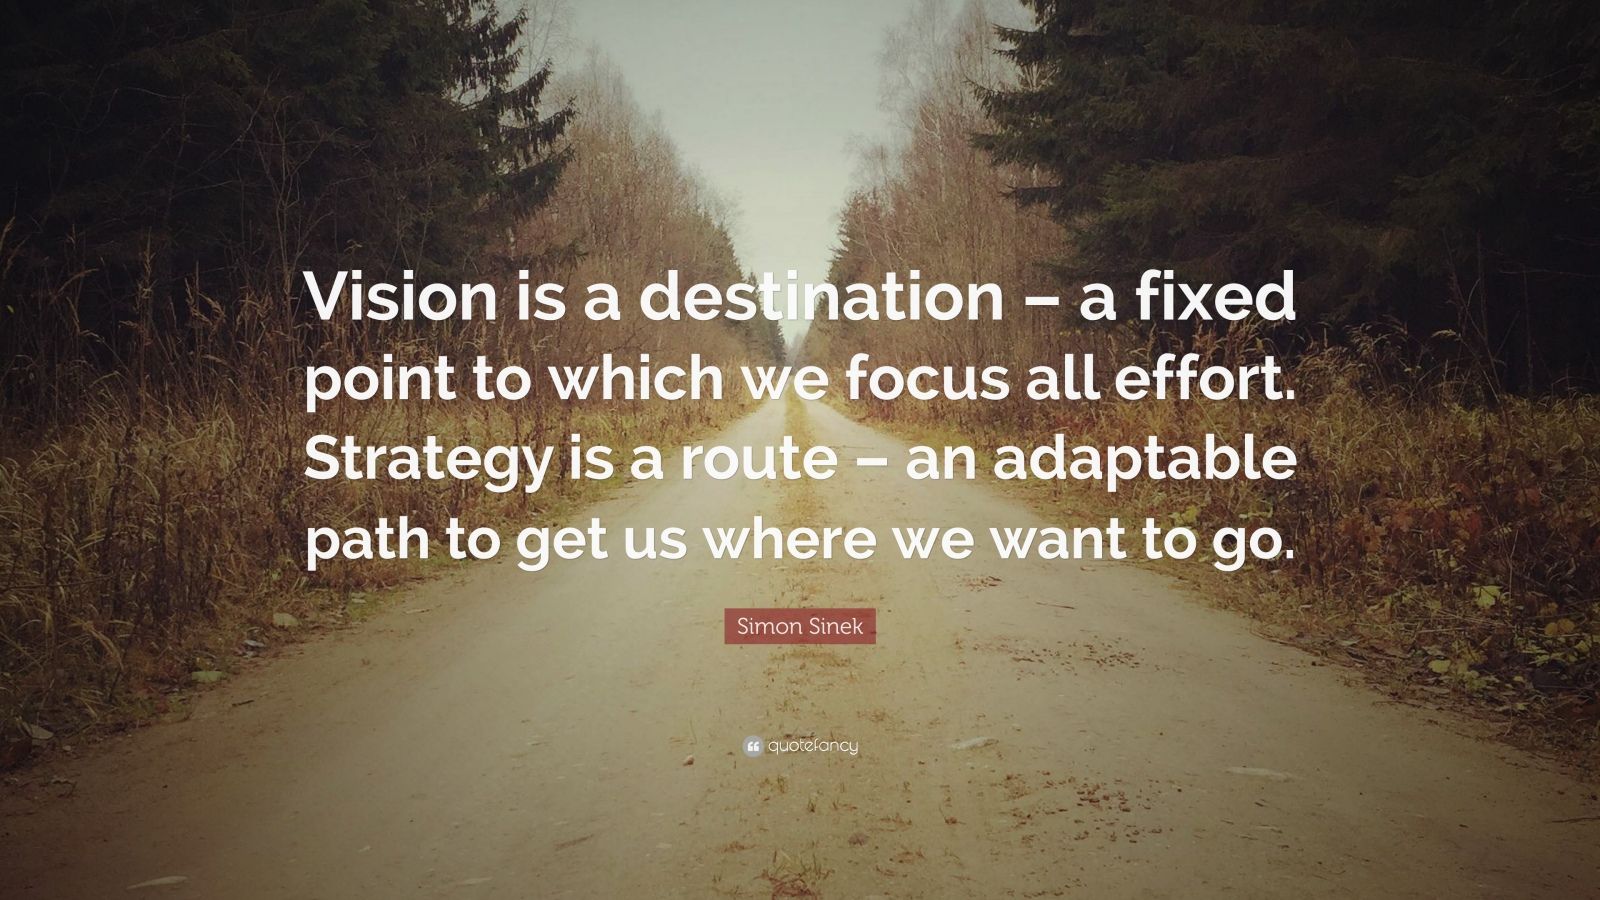 Simon Sinek Quote: “Vision is a destination – a fixed point to which we